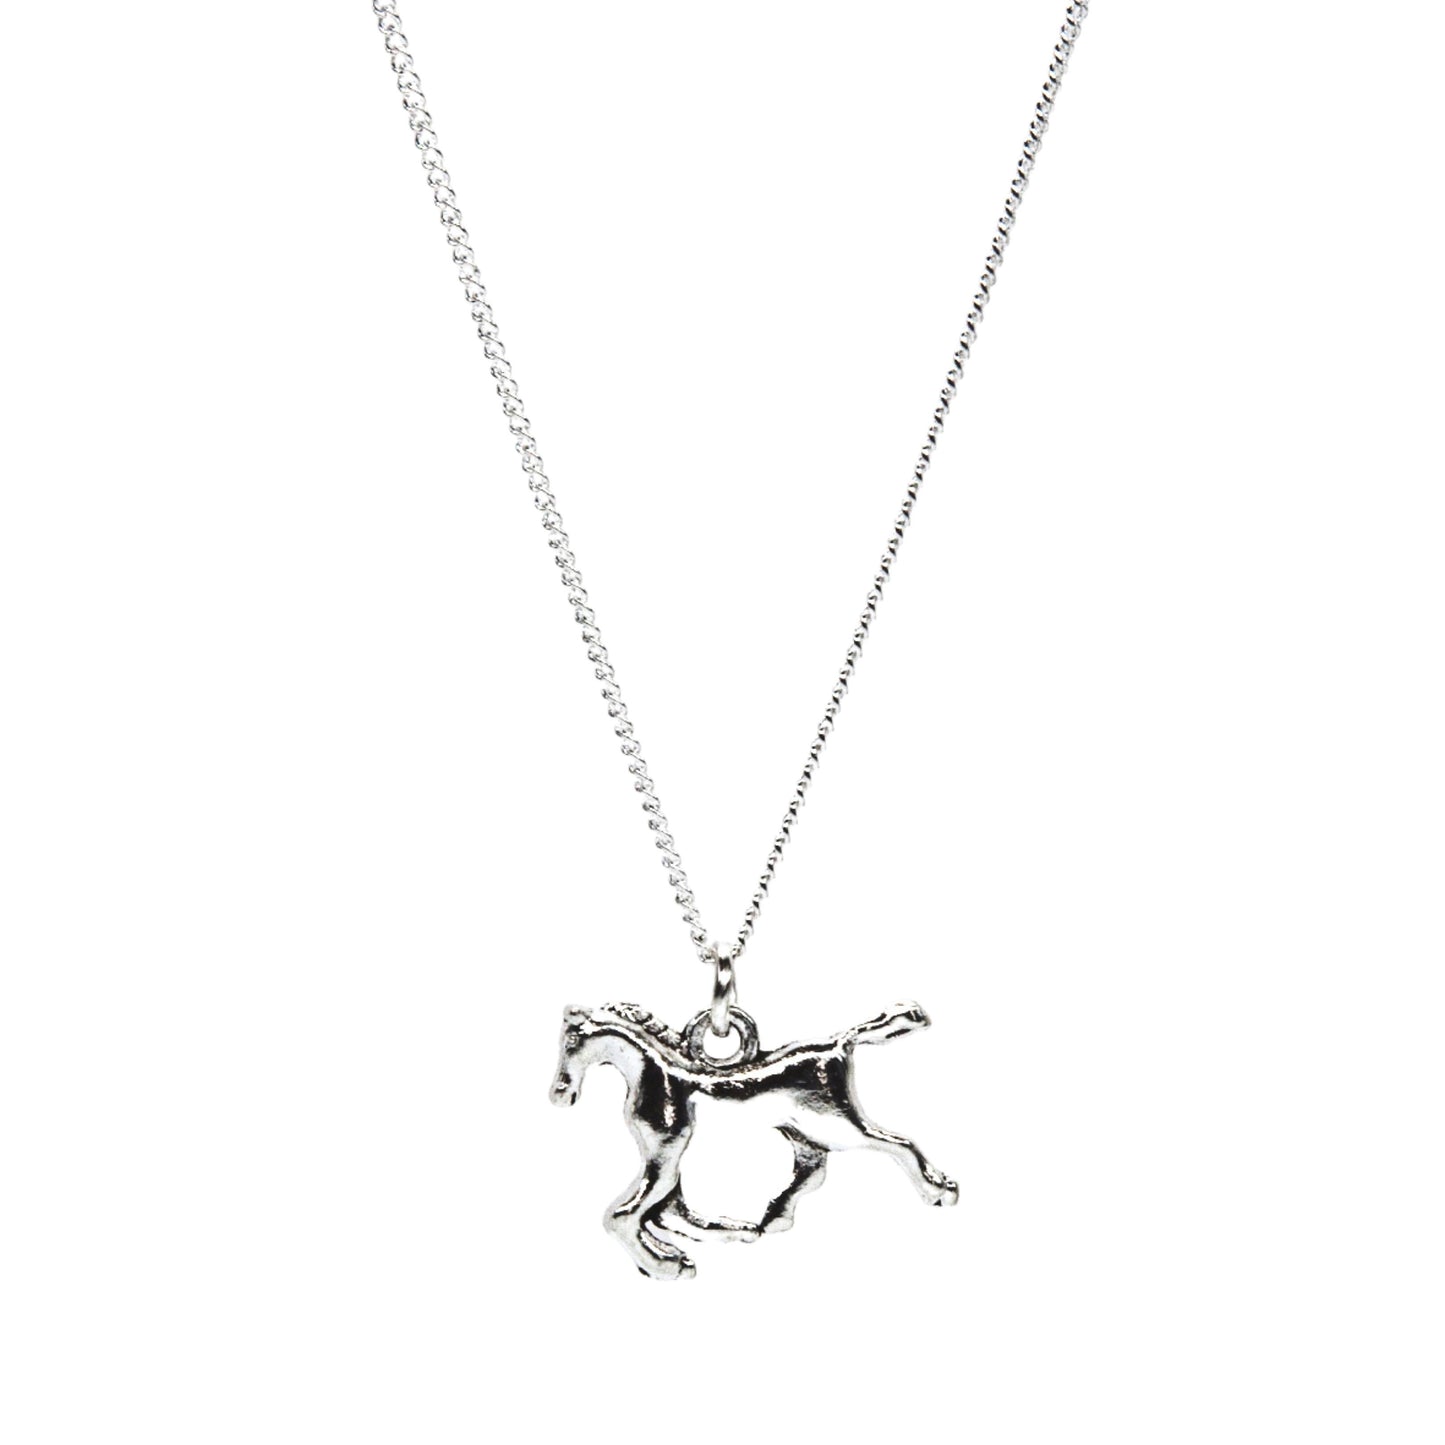 Silver Horse Necklace - Adjustable Length